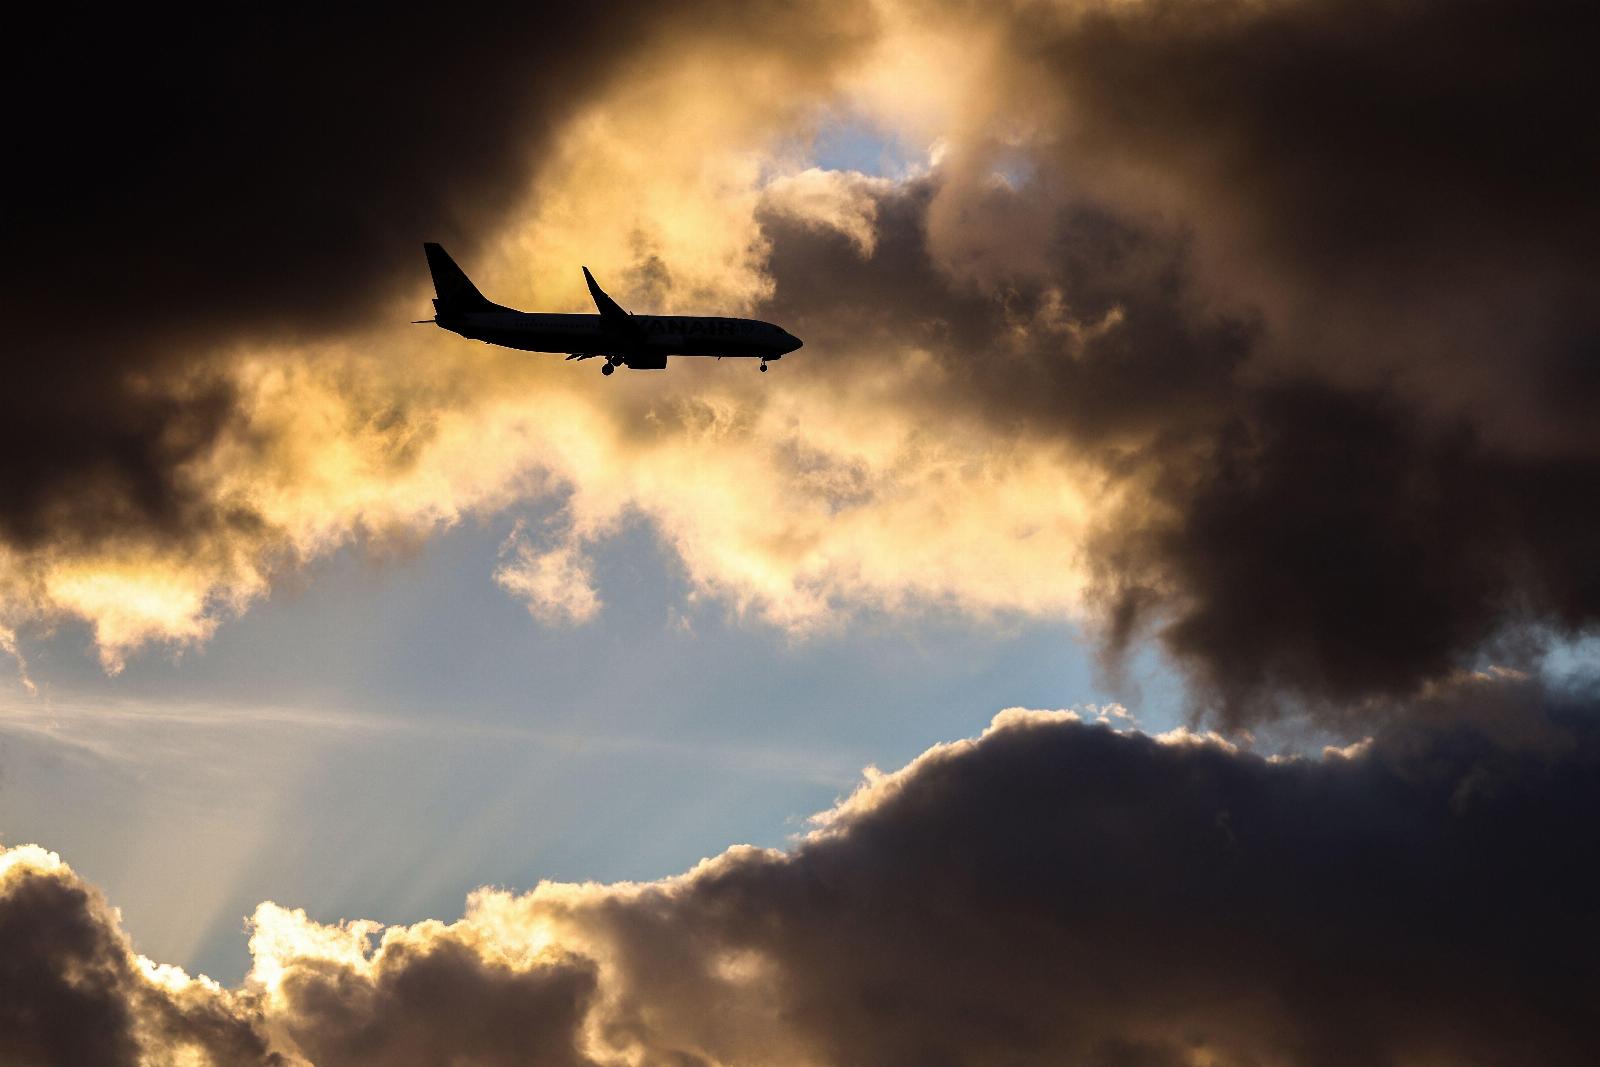 The Air Travel System May Be Flying Toward Disaster